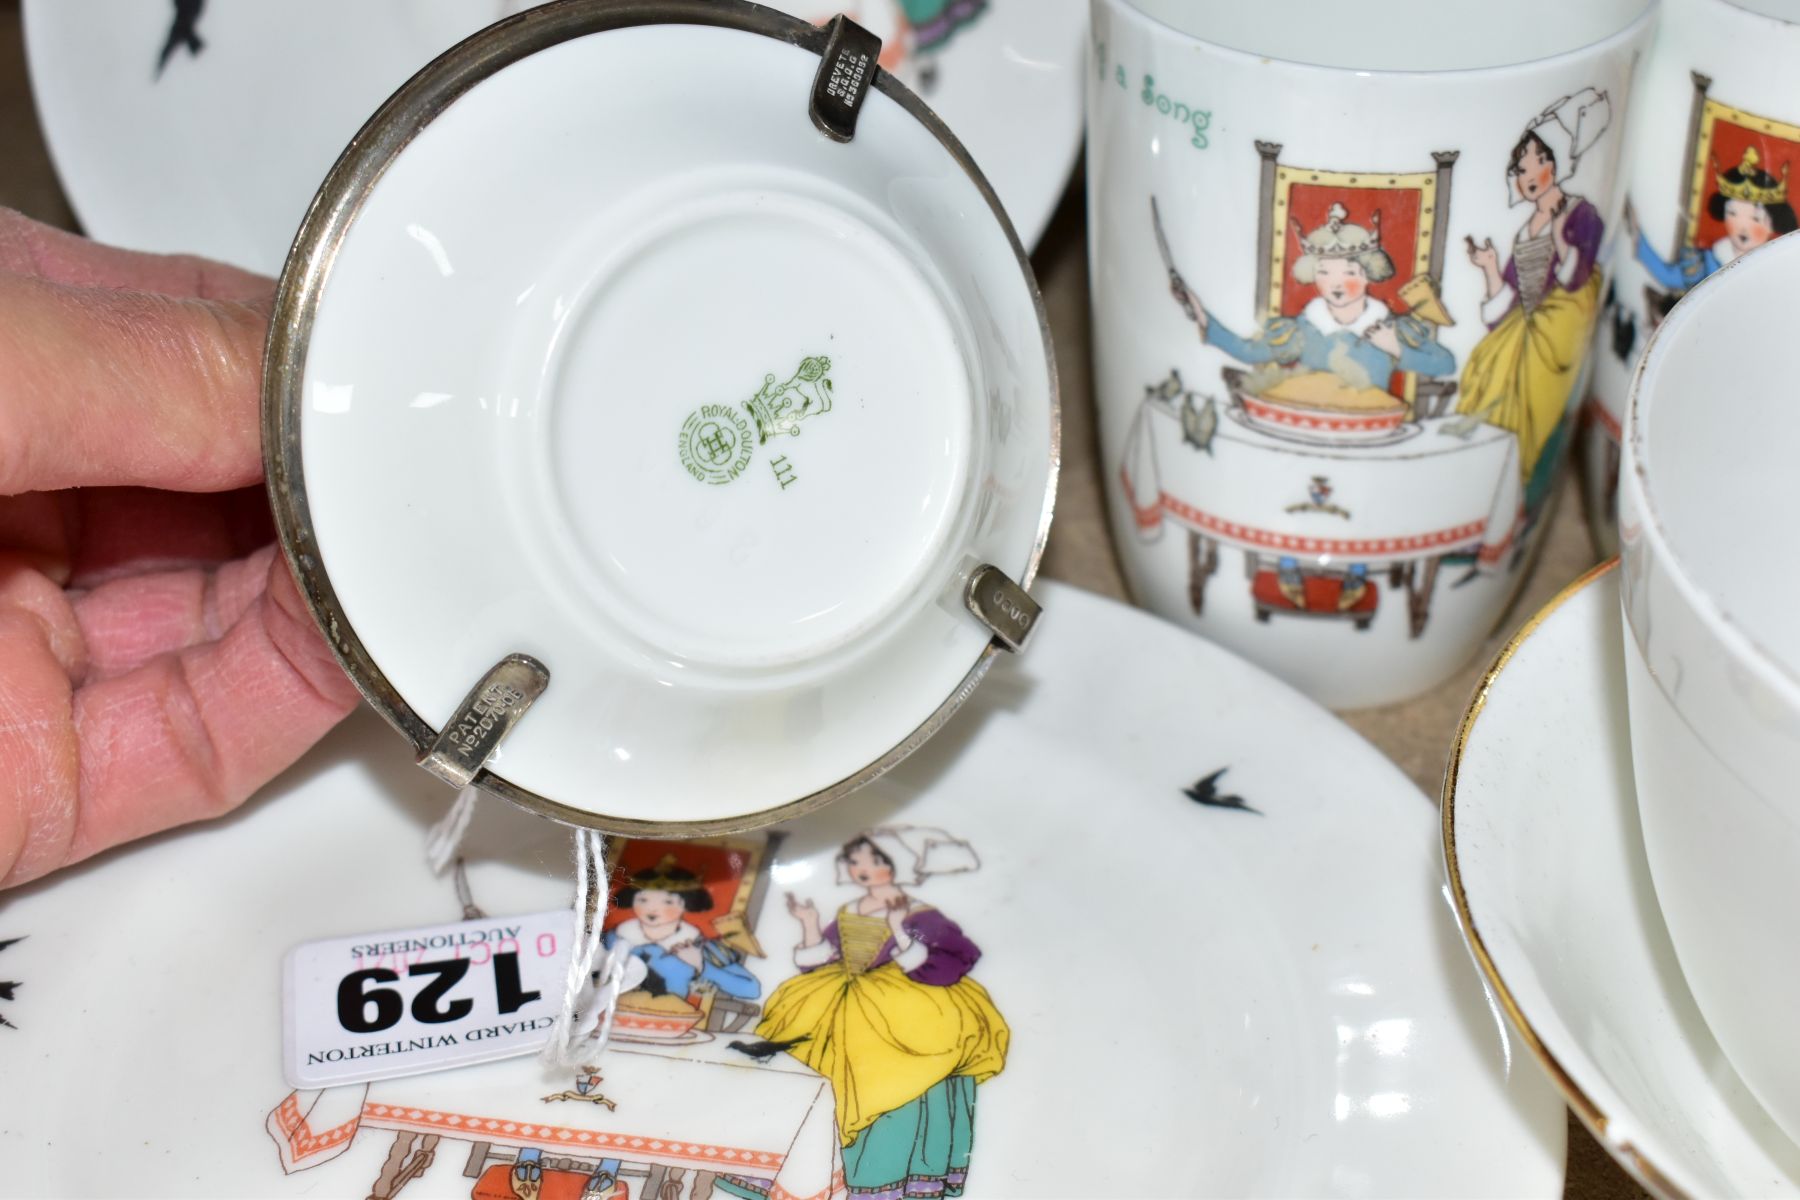 NINE PIECES OF ROYAL DOULTON CHINA NURSERY RHYMES SERIES WARE DESIGNED BY WILLIAM SAVAGE COOPER - Image 7 of 7